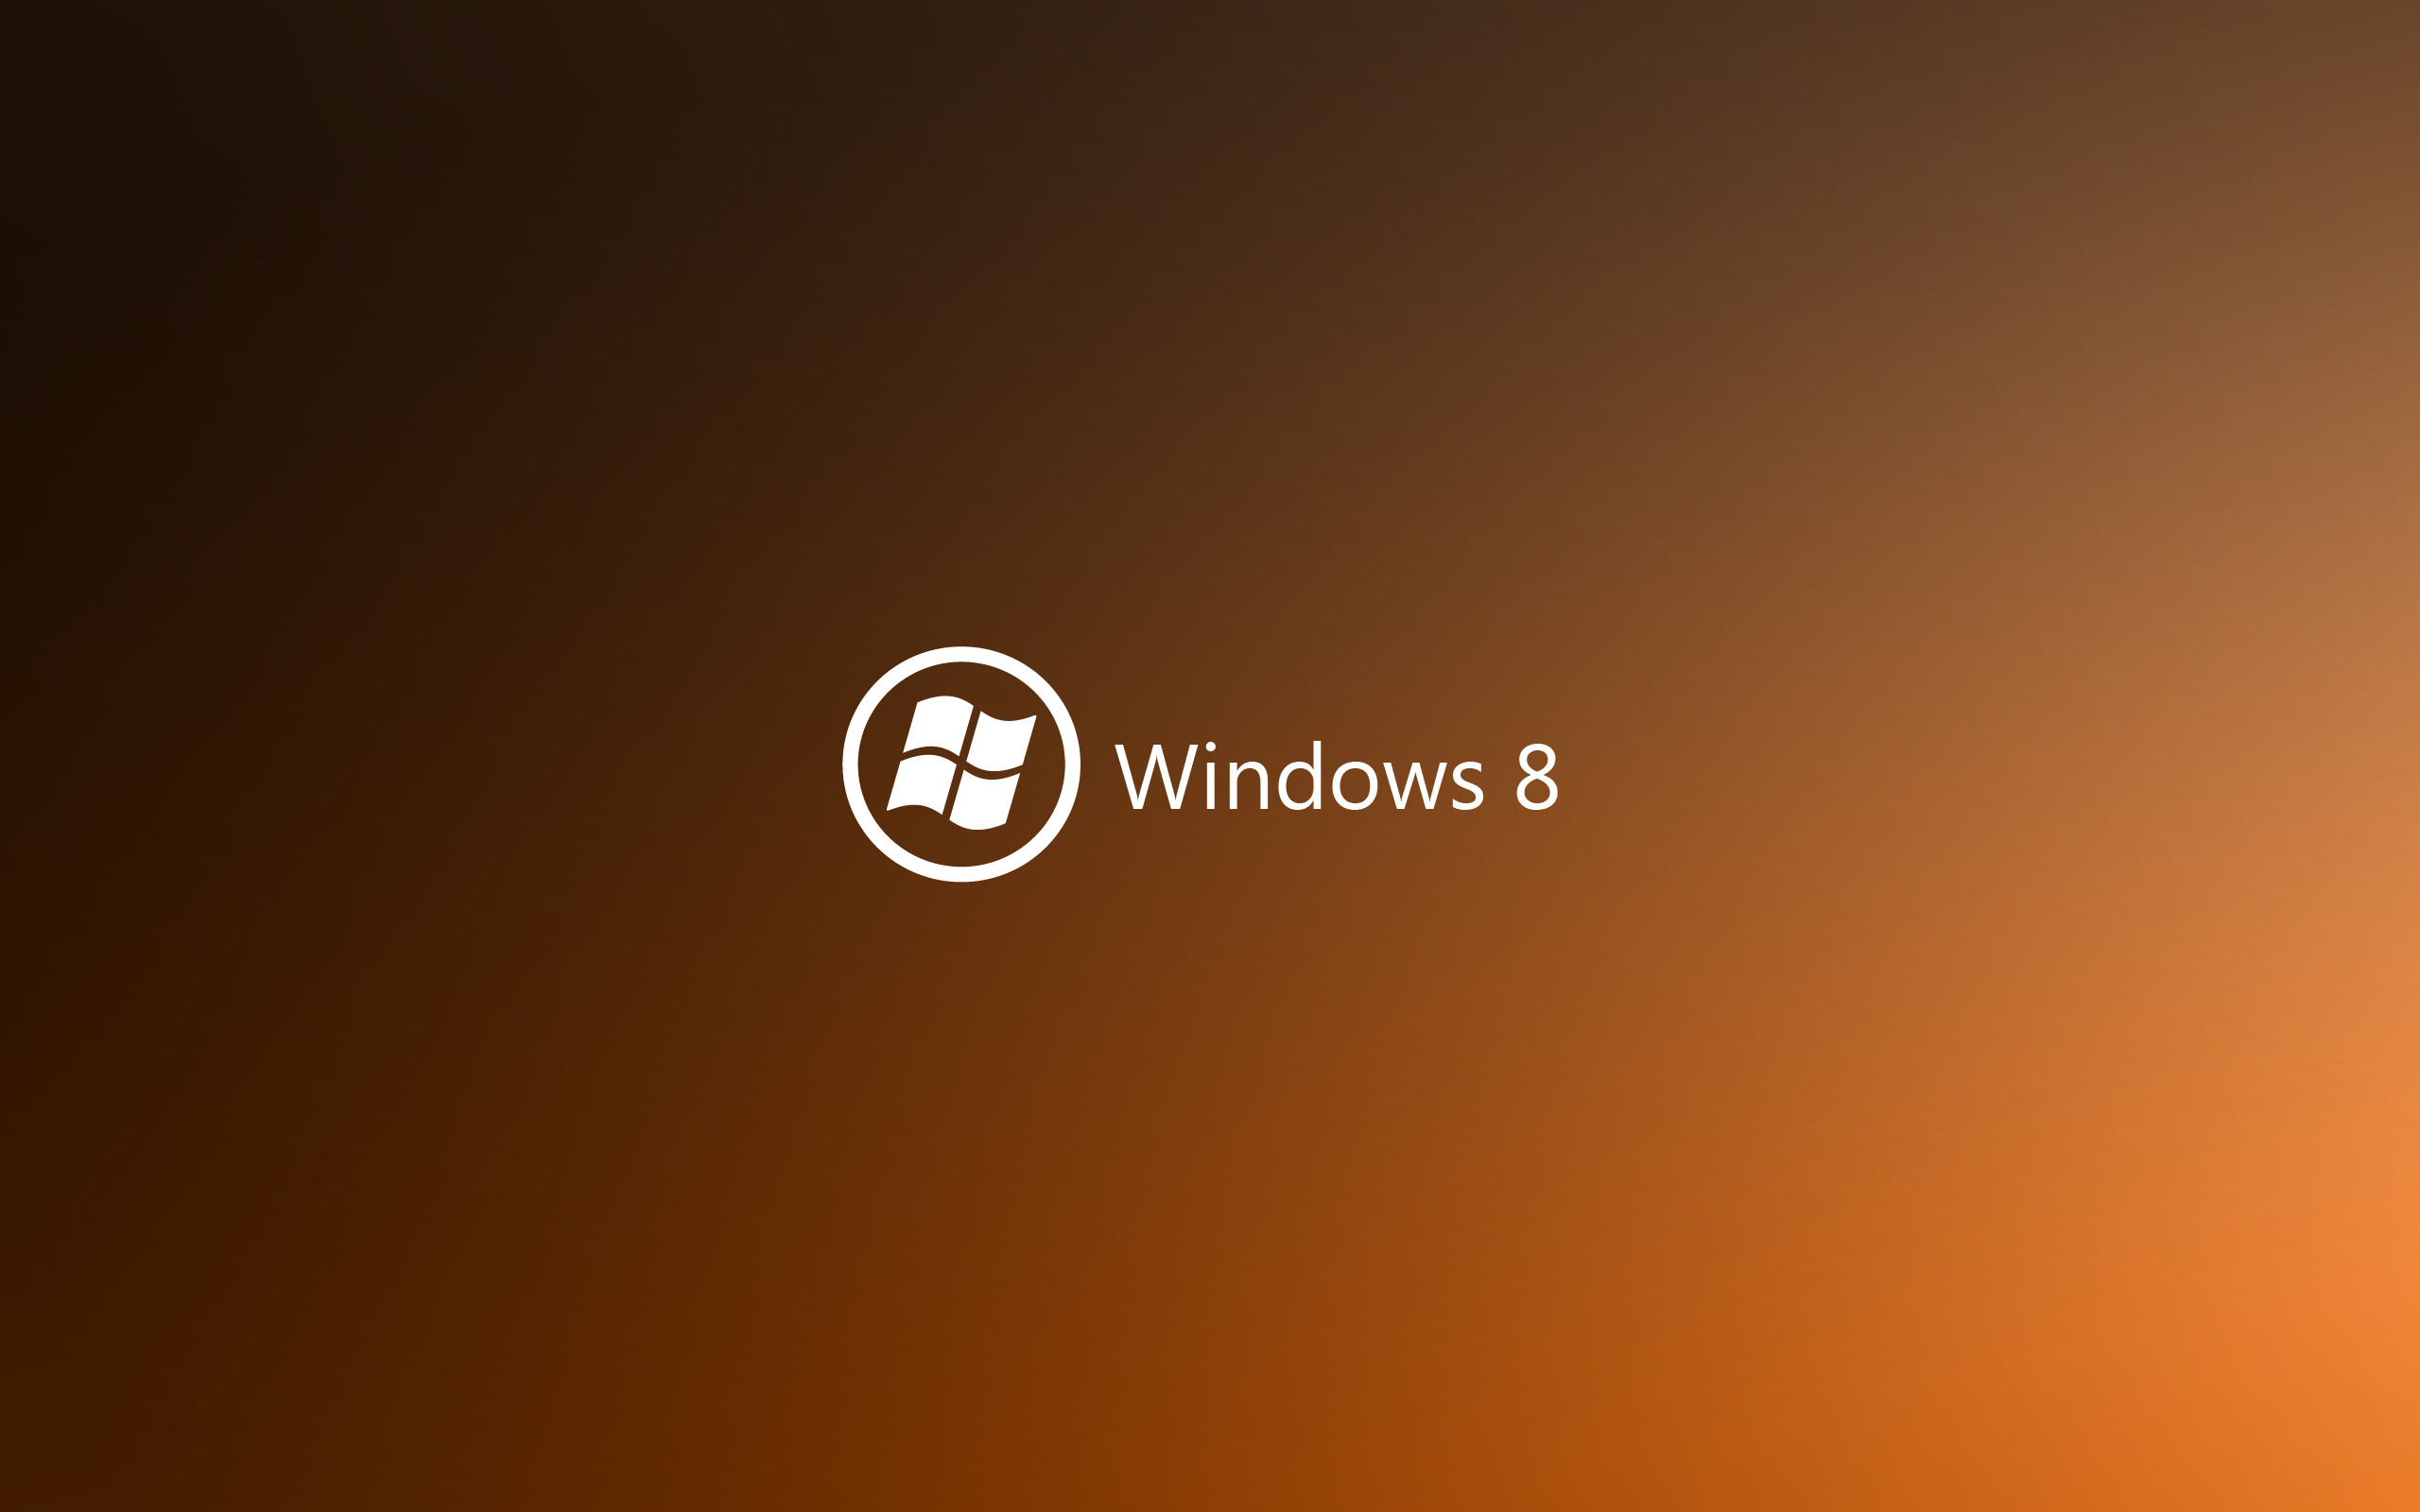 2560x1600  Dark Orange Windows 8. How to set wallpaper on your desktop?  Click the download link from above and set the wallpaper on the desktop  from your OS.